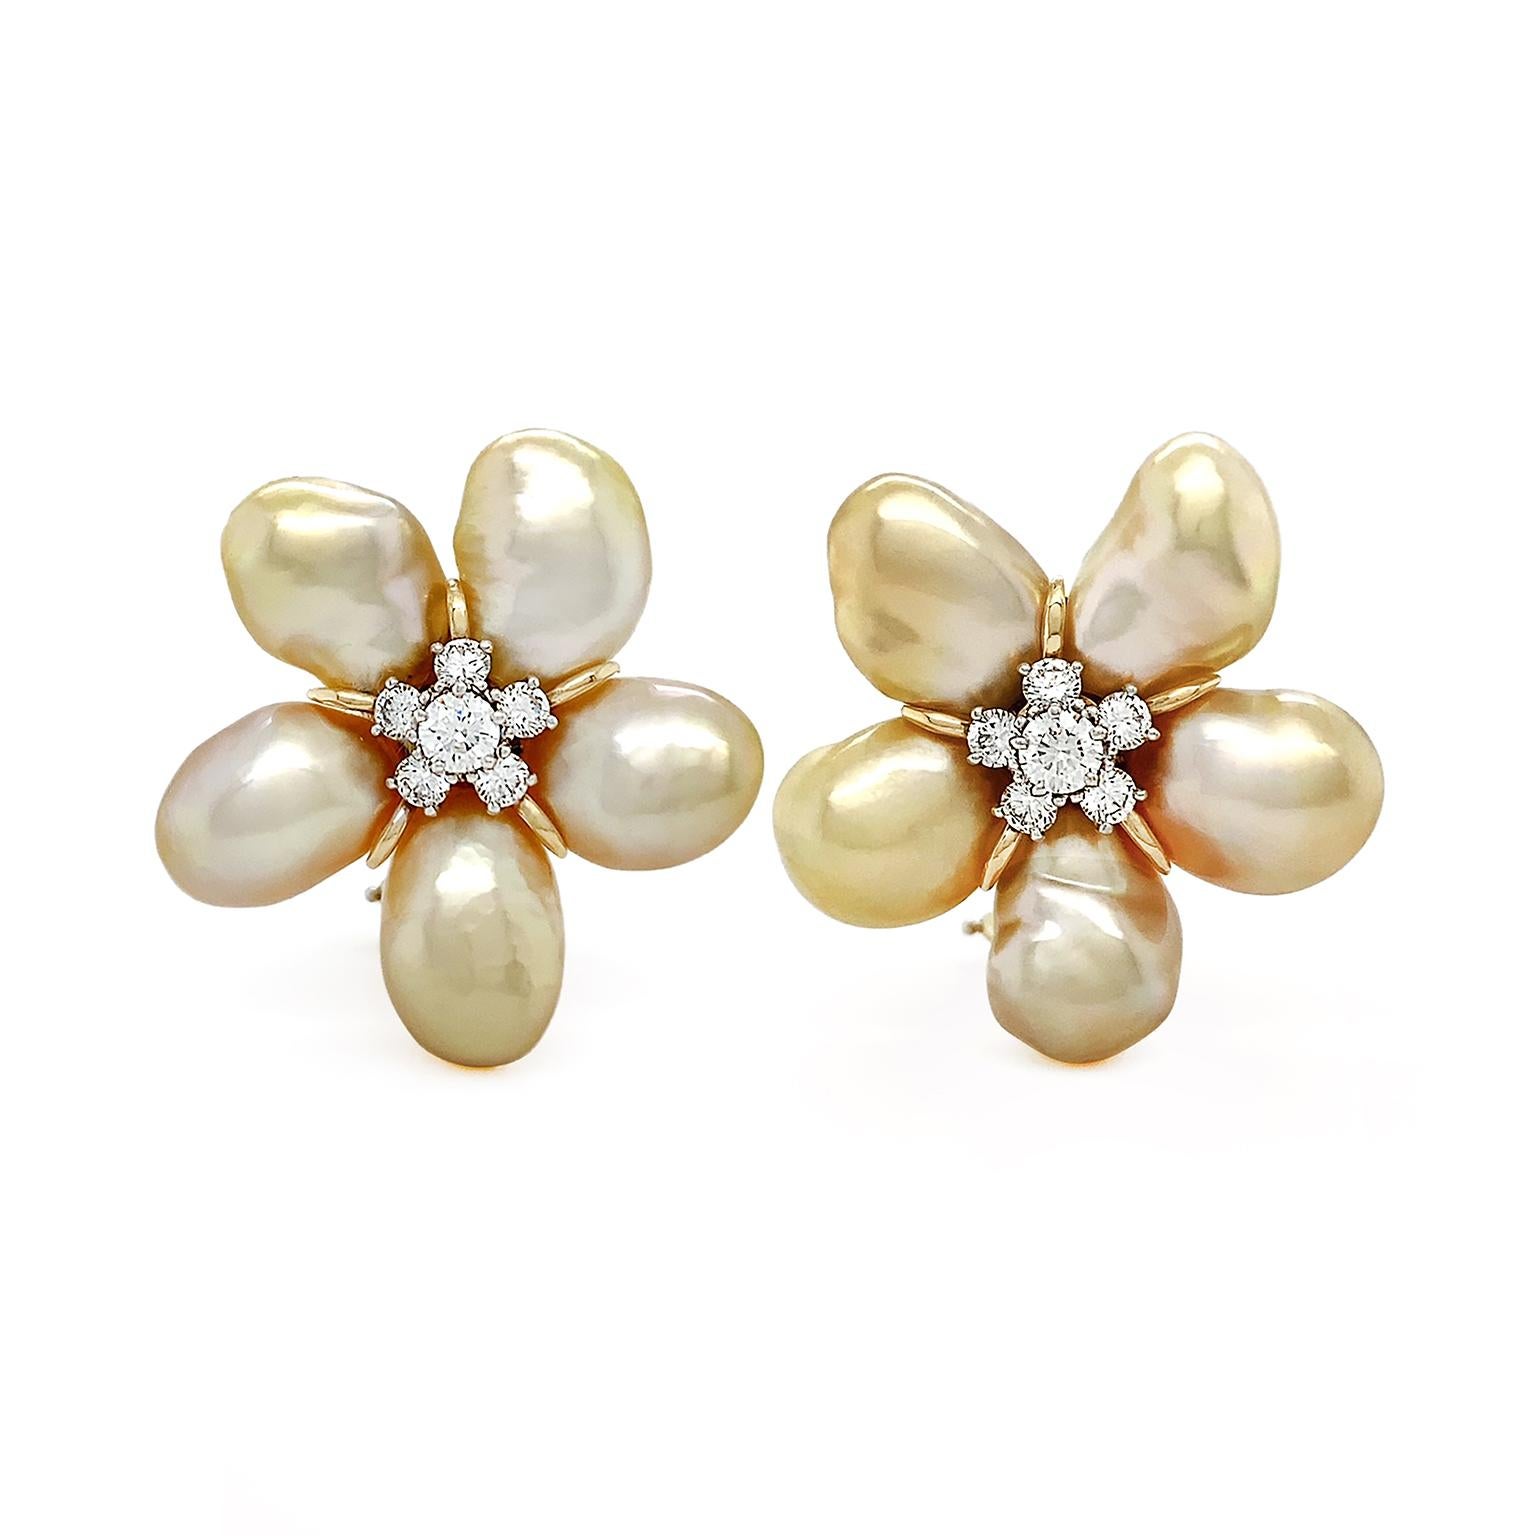 Warm luster of gold keshi pearls combine with the brilliance of diamonds for these earrings. Five baroque gold keshi pearls are arranged in a circular pattern extending outward. Keshi pearls are known for their absence of a nucleus, creating prized